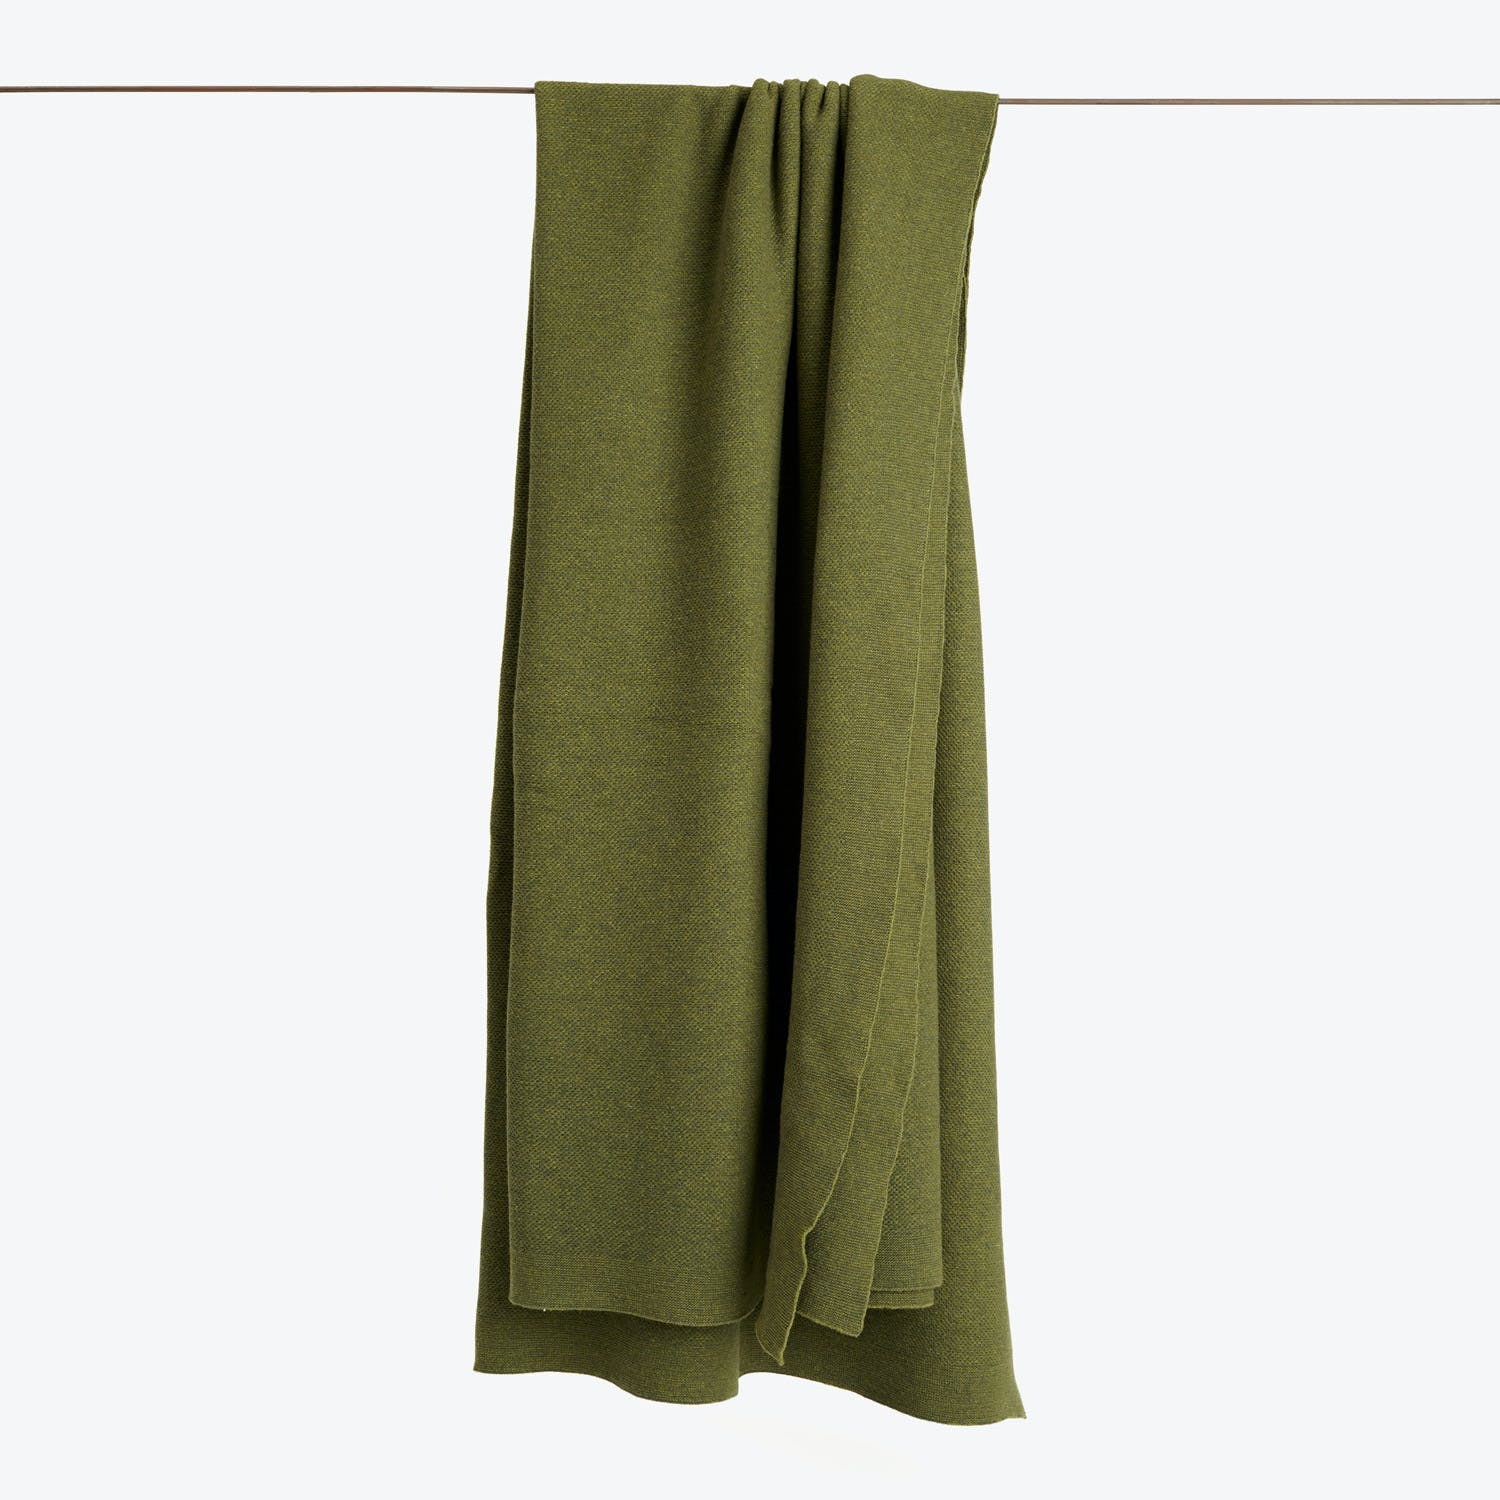 Green fabric drapes effortlessly, creating a serene visual effect.